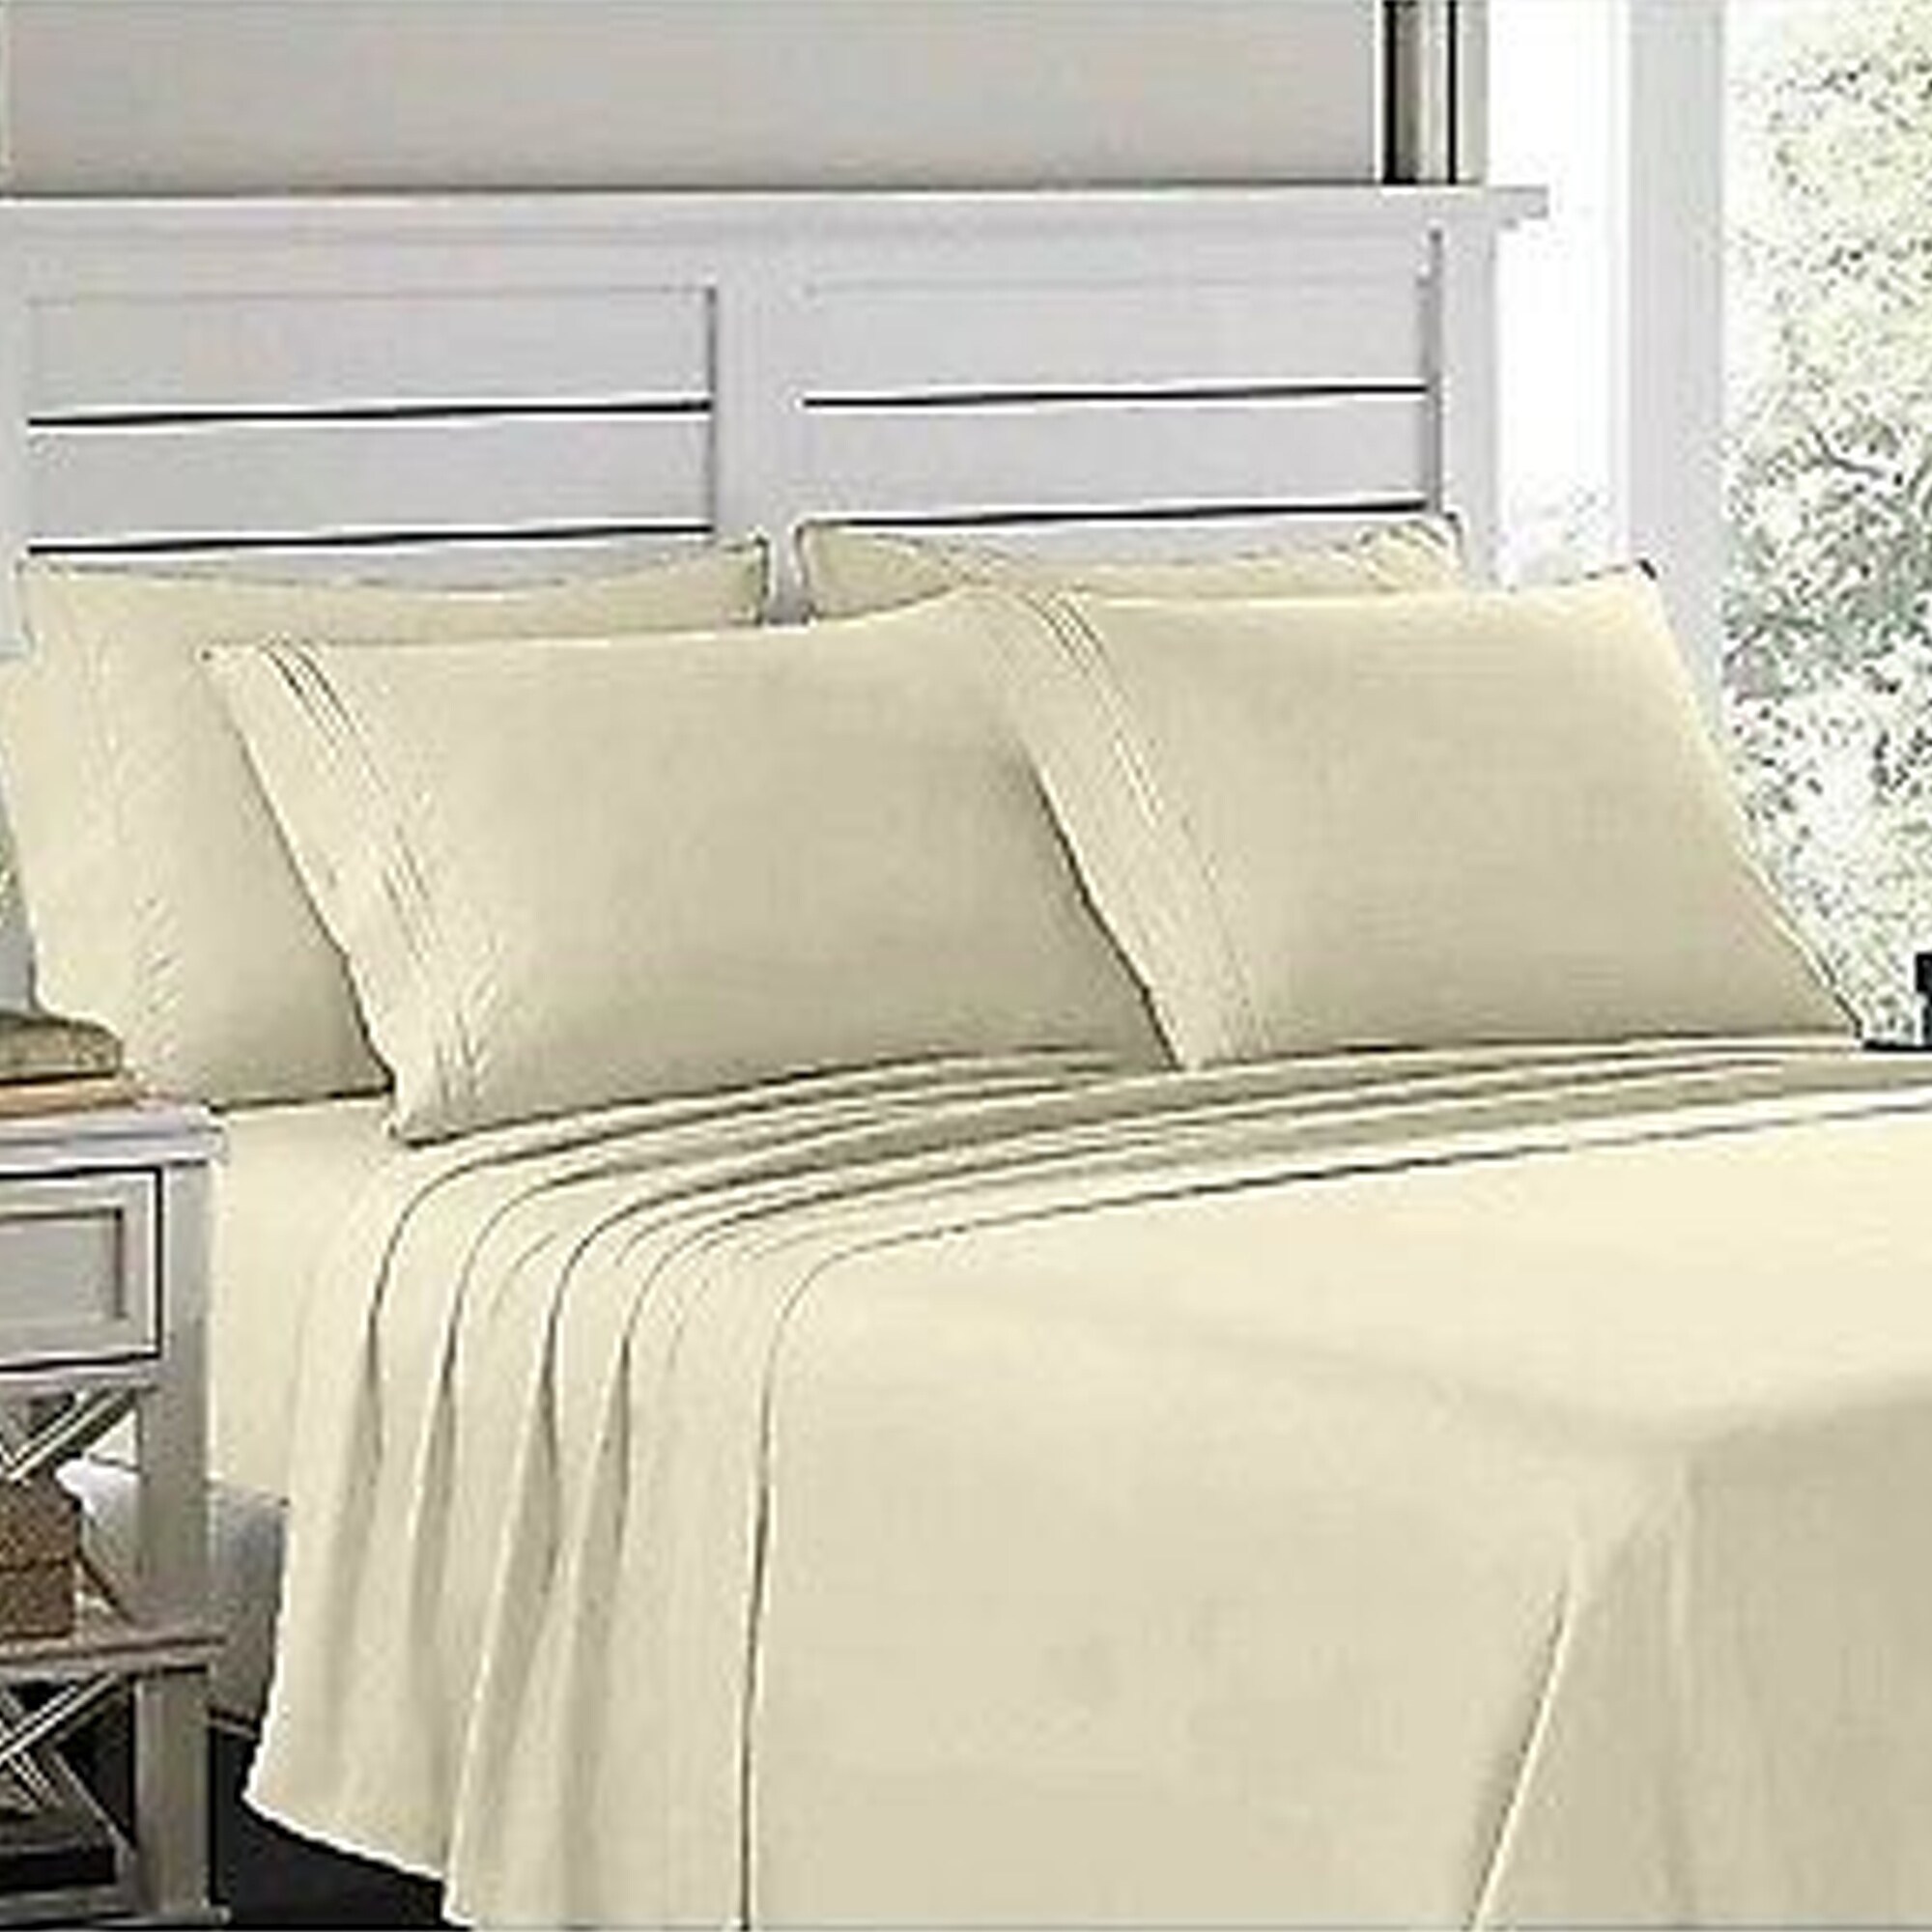 Soft Bed Sheets Set 3/4 Piece Deep Pocket Bedding Sets Queen King Full Twin Size 